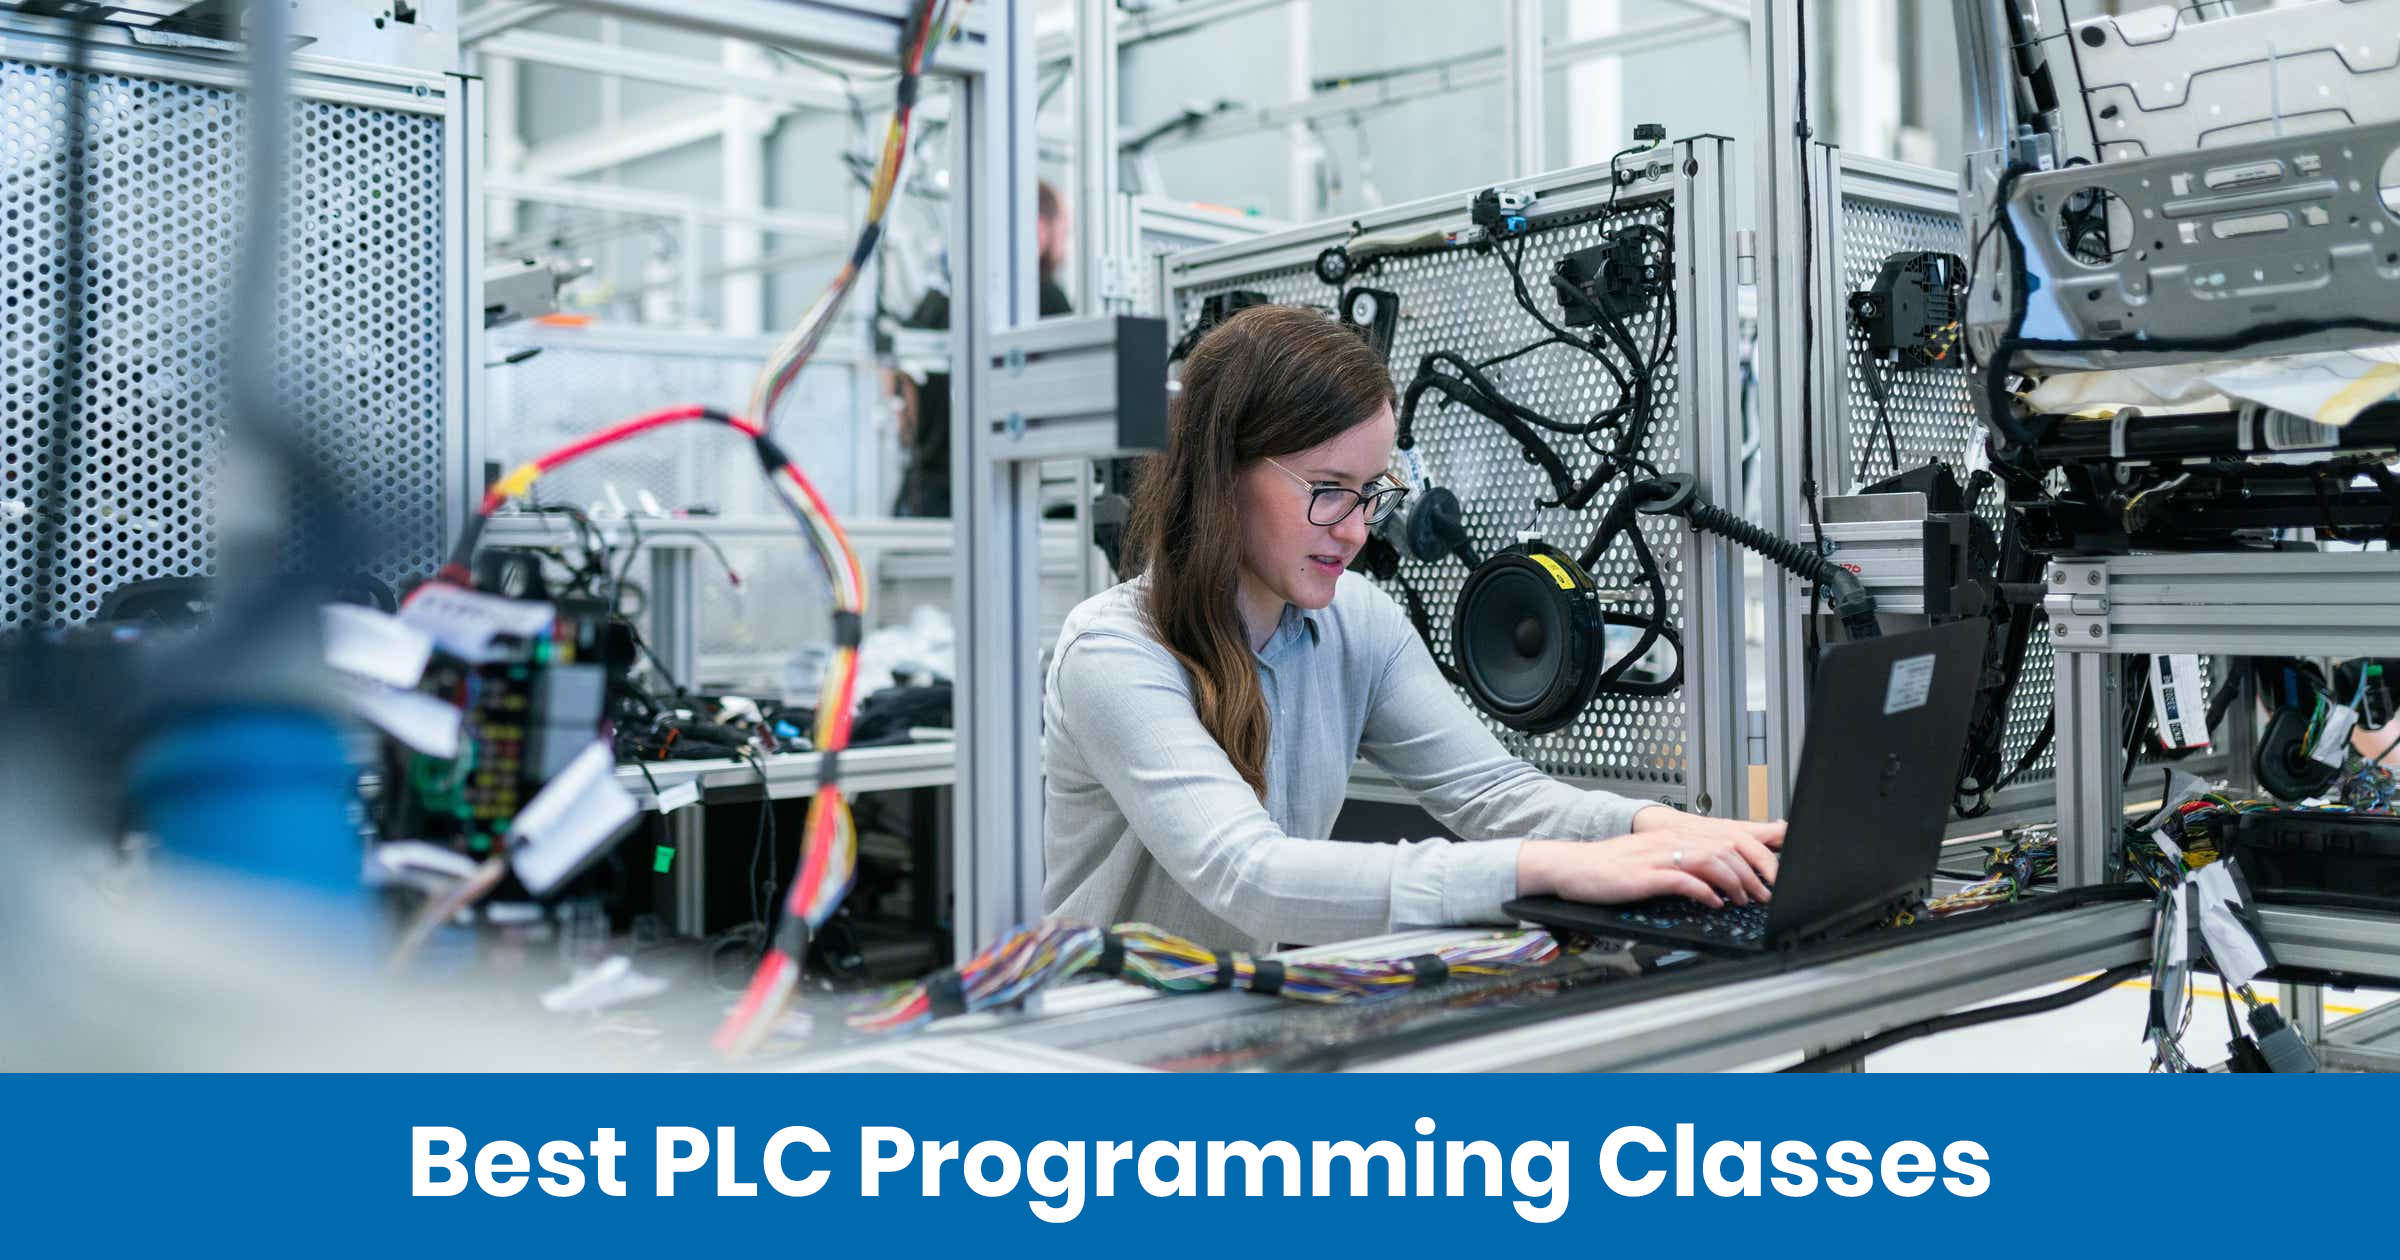 Best PLC Programming Classes and Training Courses